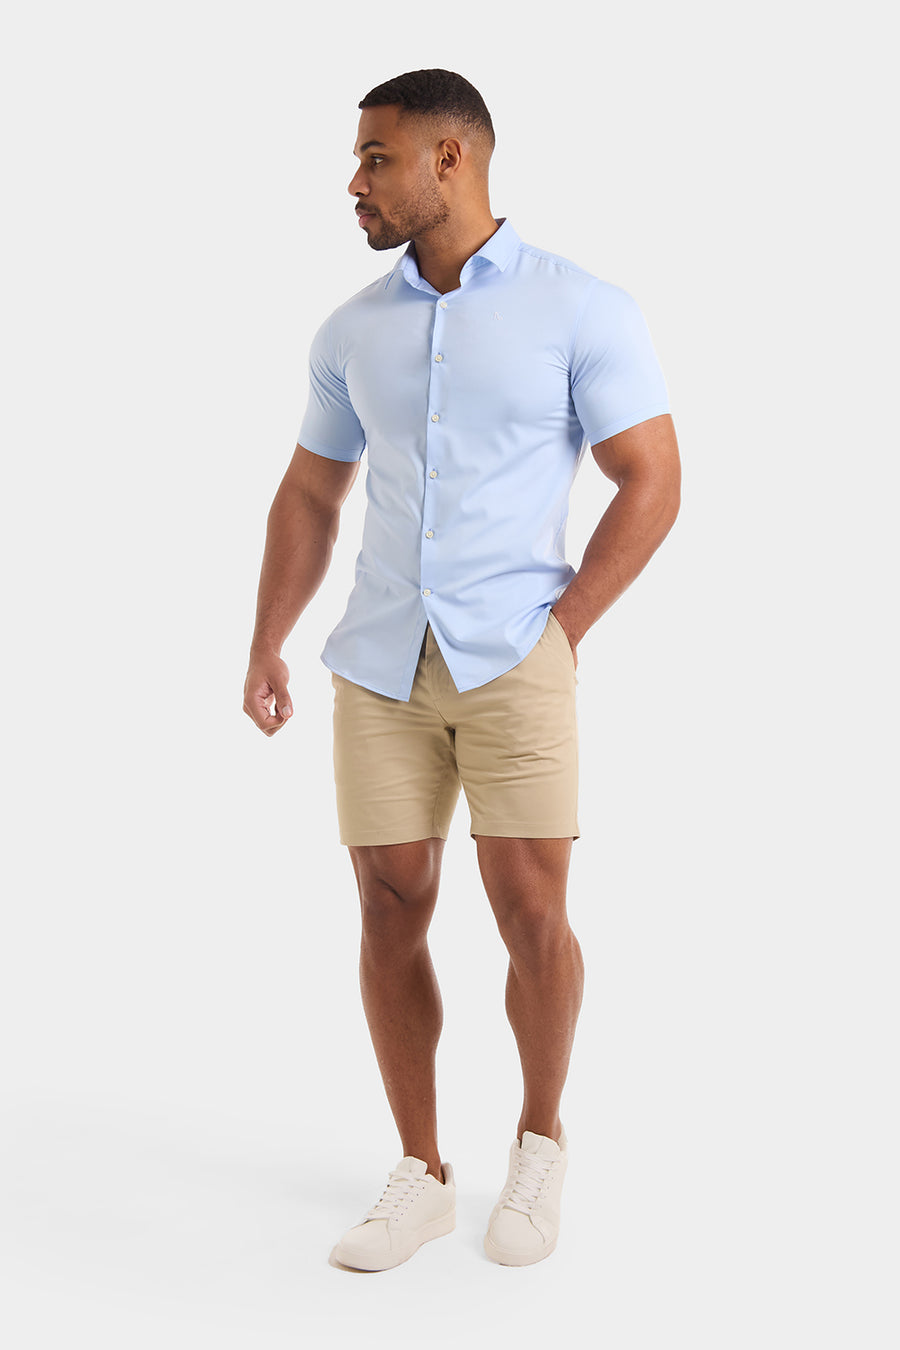 Athletic Fit Chino Shorts 7" in Stone - TAILORED ATHLETE - USA